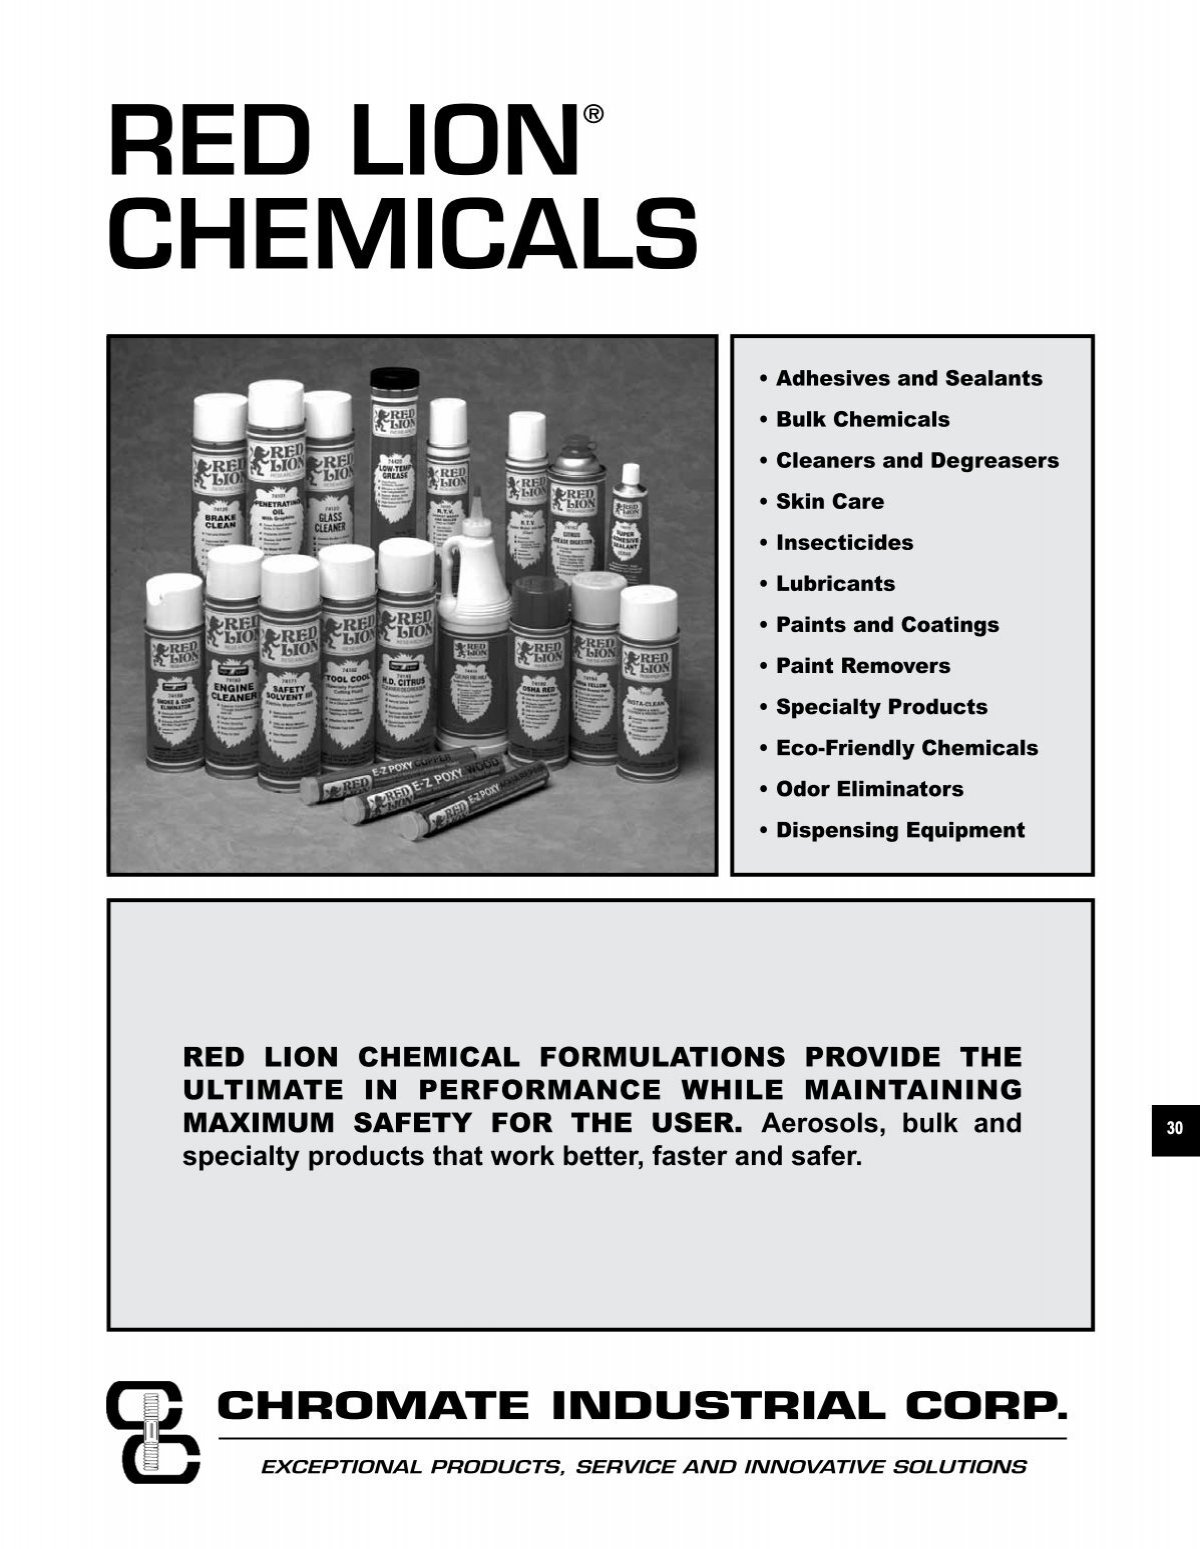 RED LION® CHEMICALS - Chromate Industrial Corporation